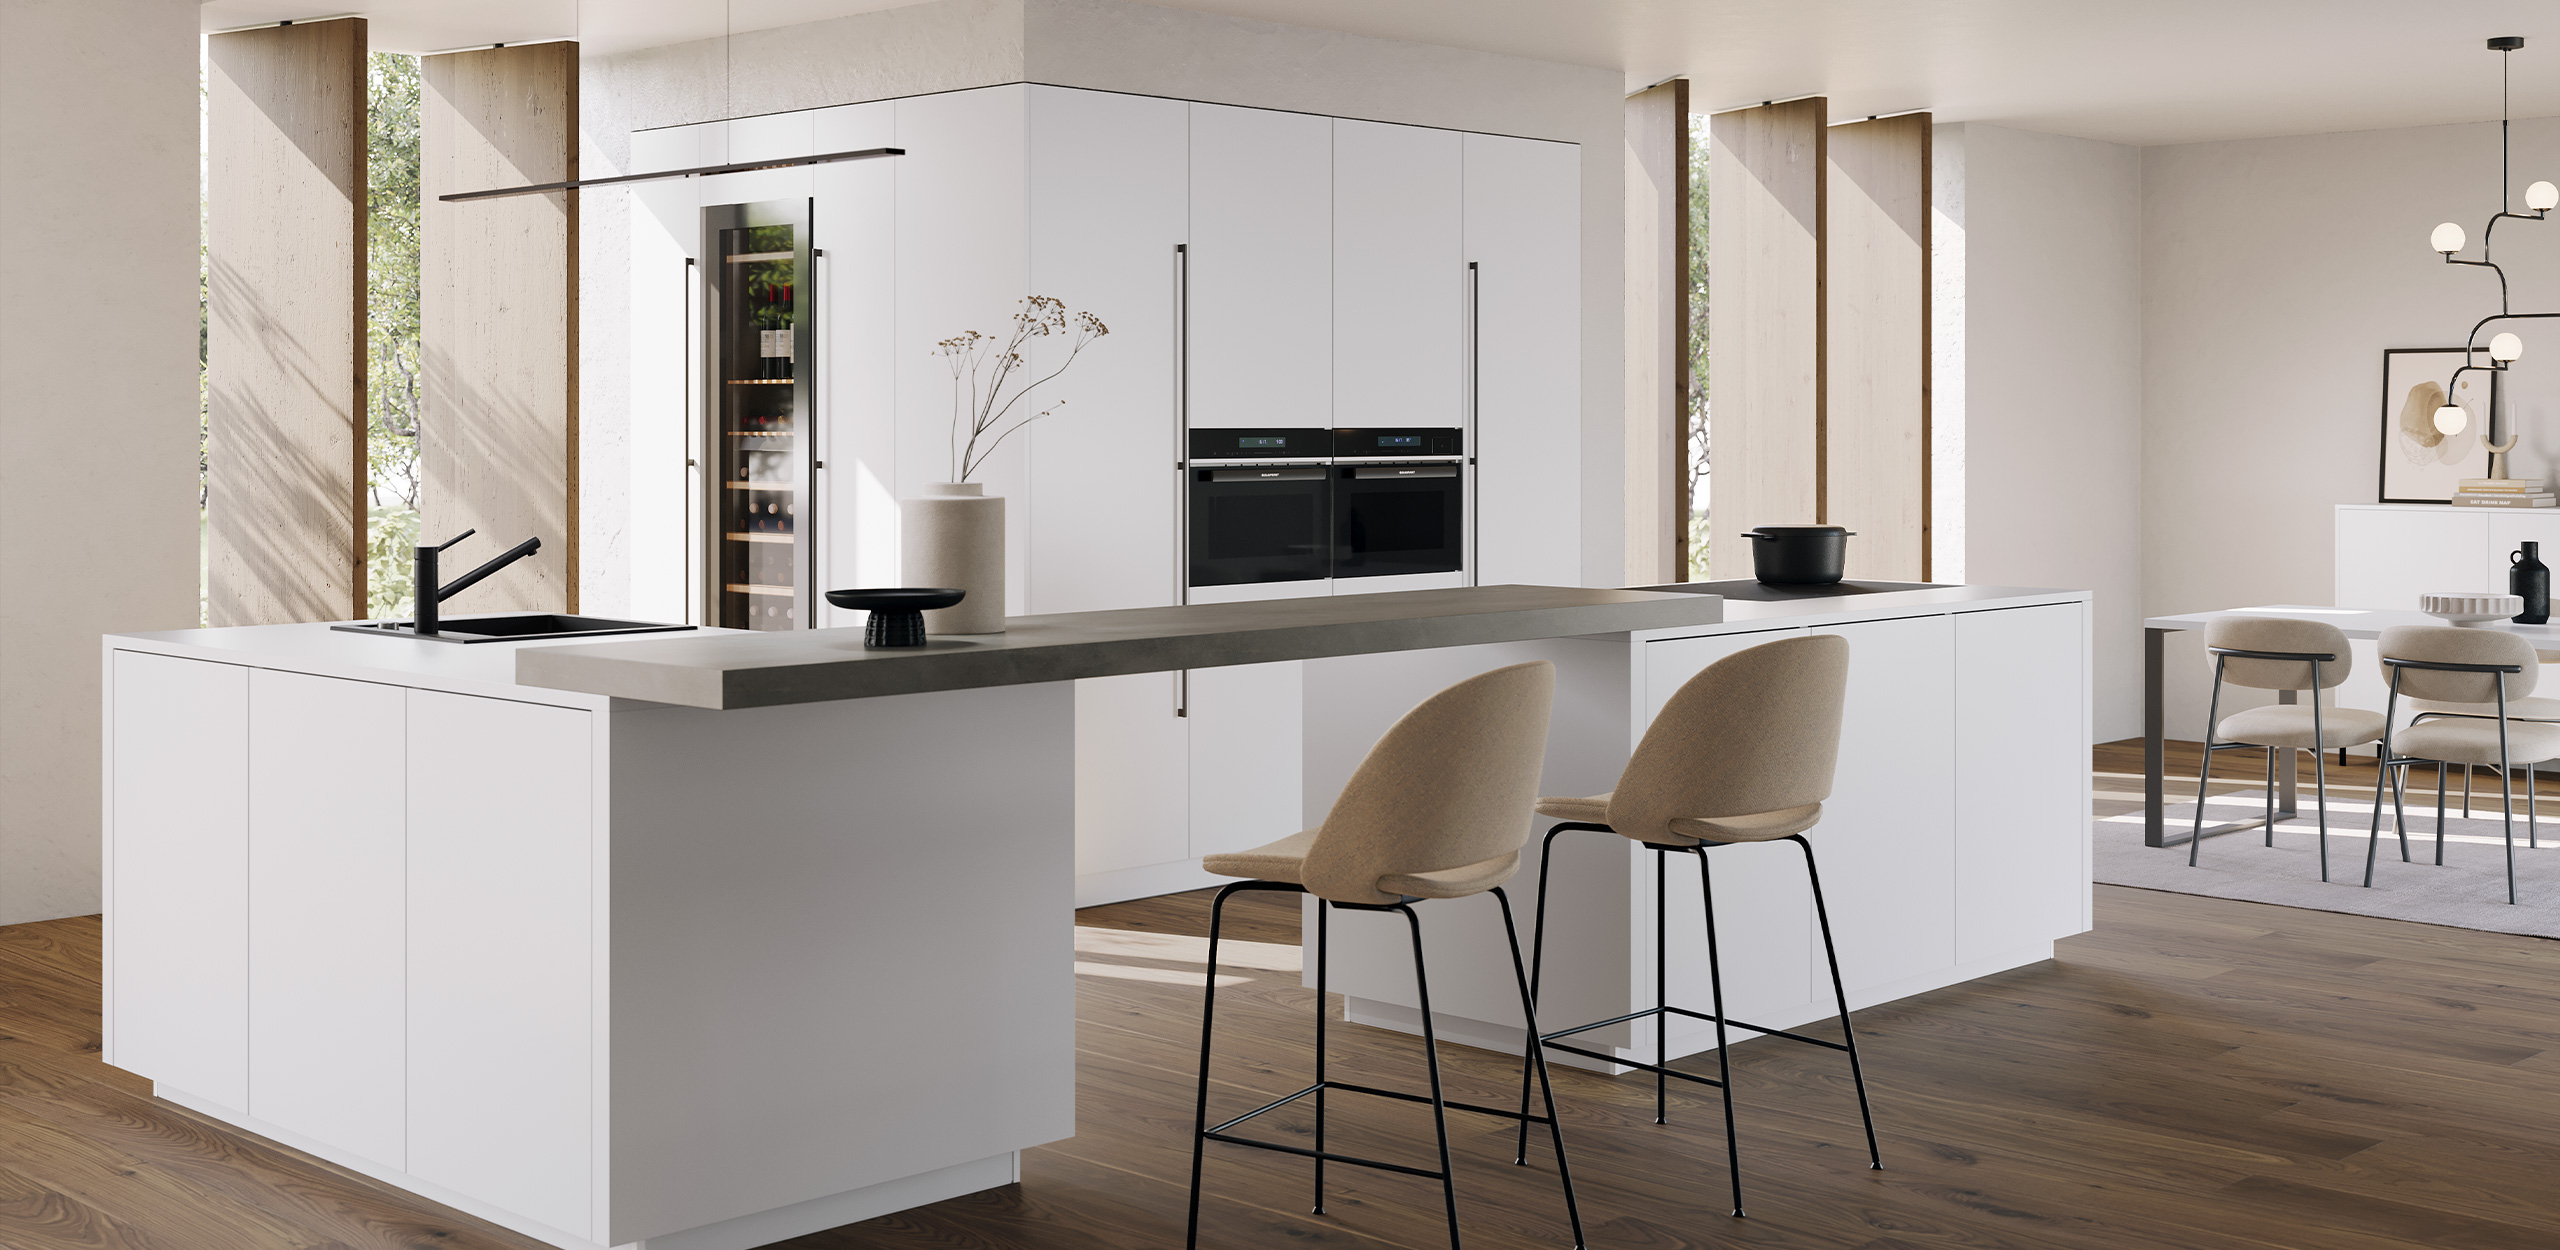 Image of AV 2135 Crystal White with island and integrated dining area, two high chairs with black metal legs 